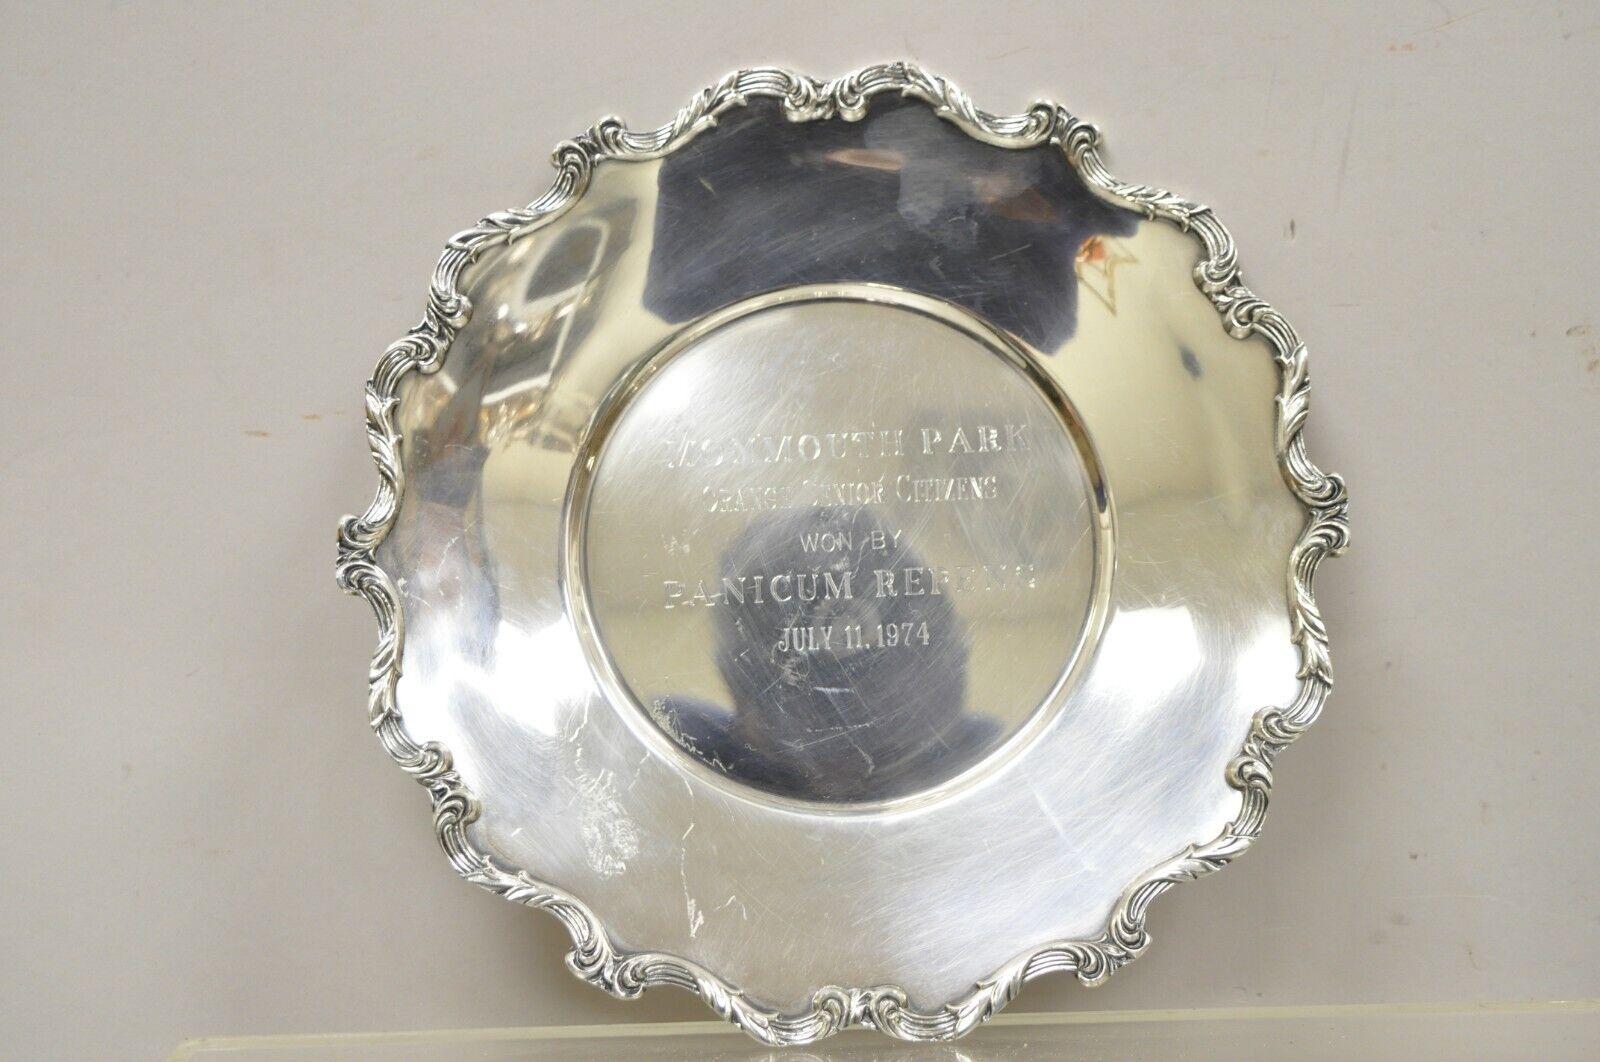 Vintage Wallace 1125 Silver Plated Monmouth Park Award Plates. Item features scalloped Edges, original hallmark.
Plate 1 reads: “MONMOUTH PARK ORANGE SENIOR CITIZENS WON BY PANICUM REPENS JULY 11, 1974”
Plate 2 reads: “MONMOUTH PARK J.J. COMPOSITE